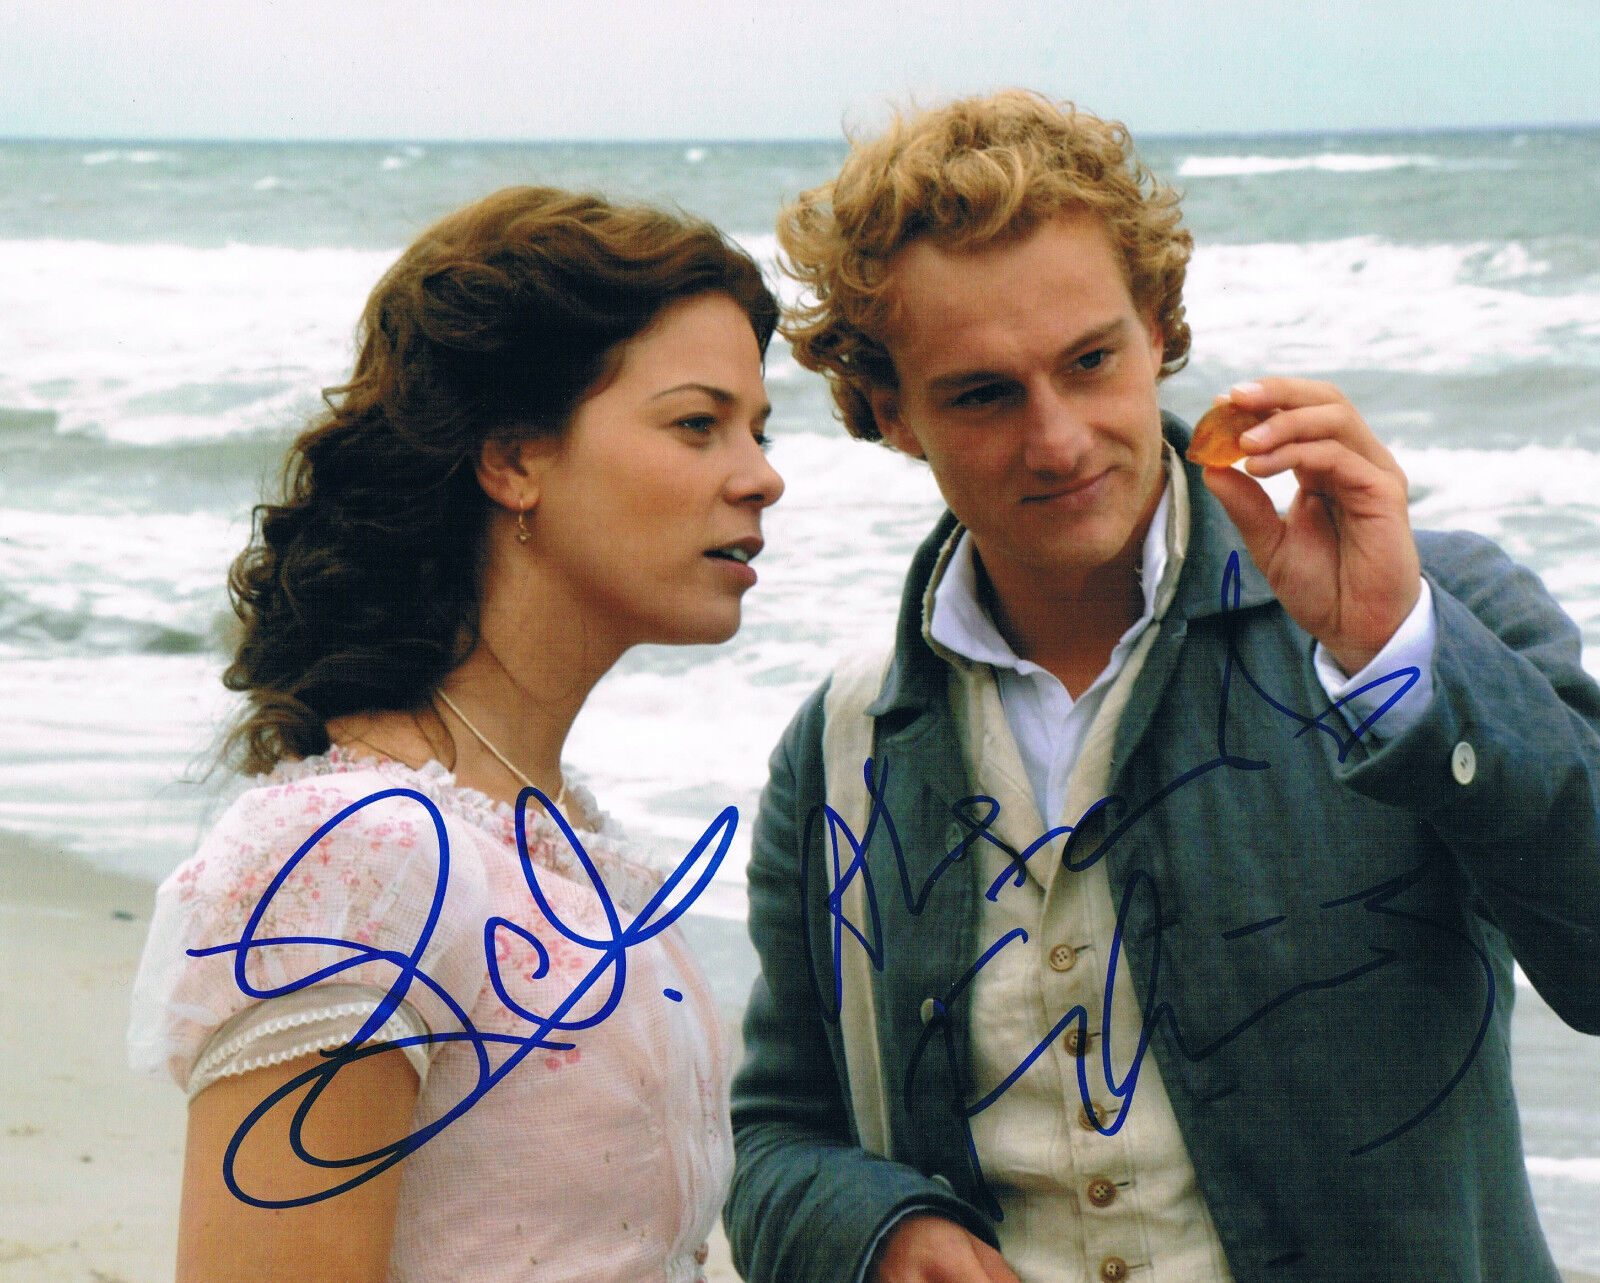 Romy - Jessica Schwarz & Alexander Fehling signed Photo Poster painting, 8x10 inch IN PERSON